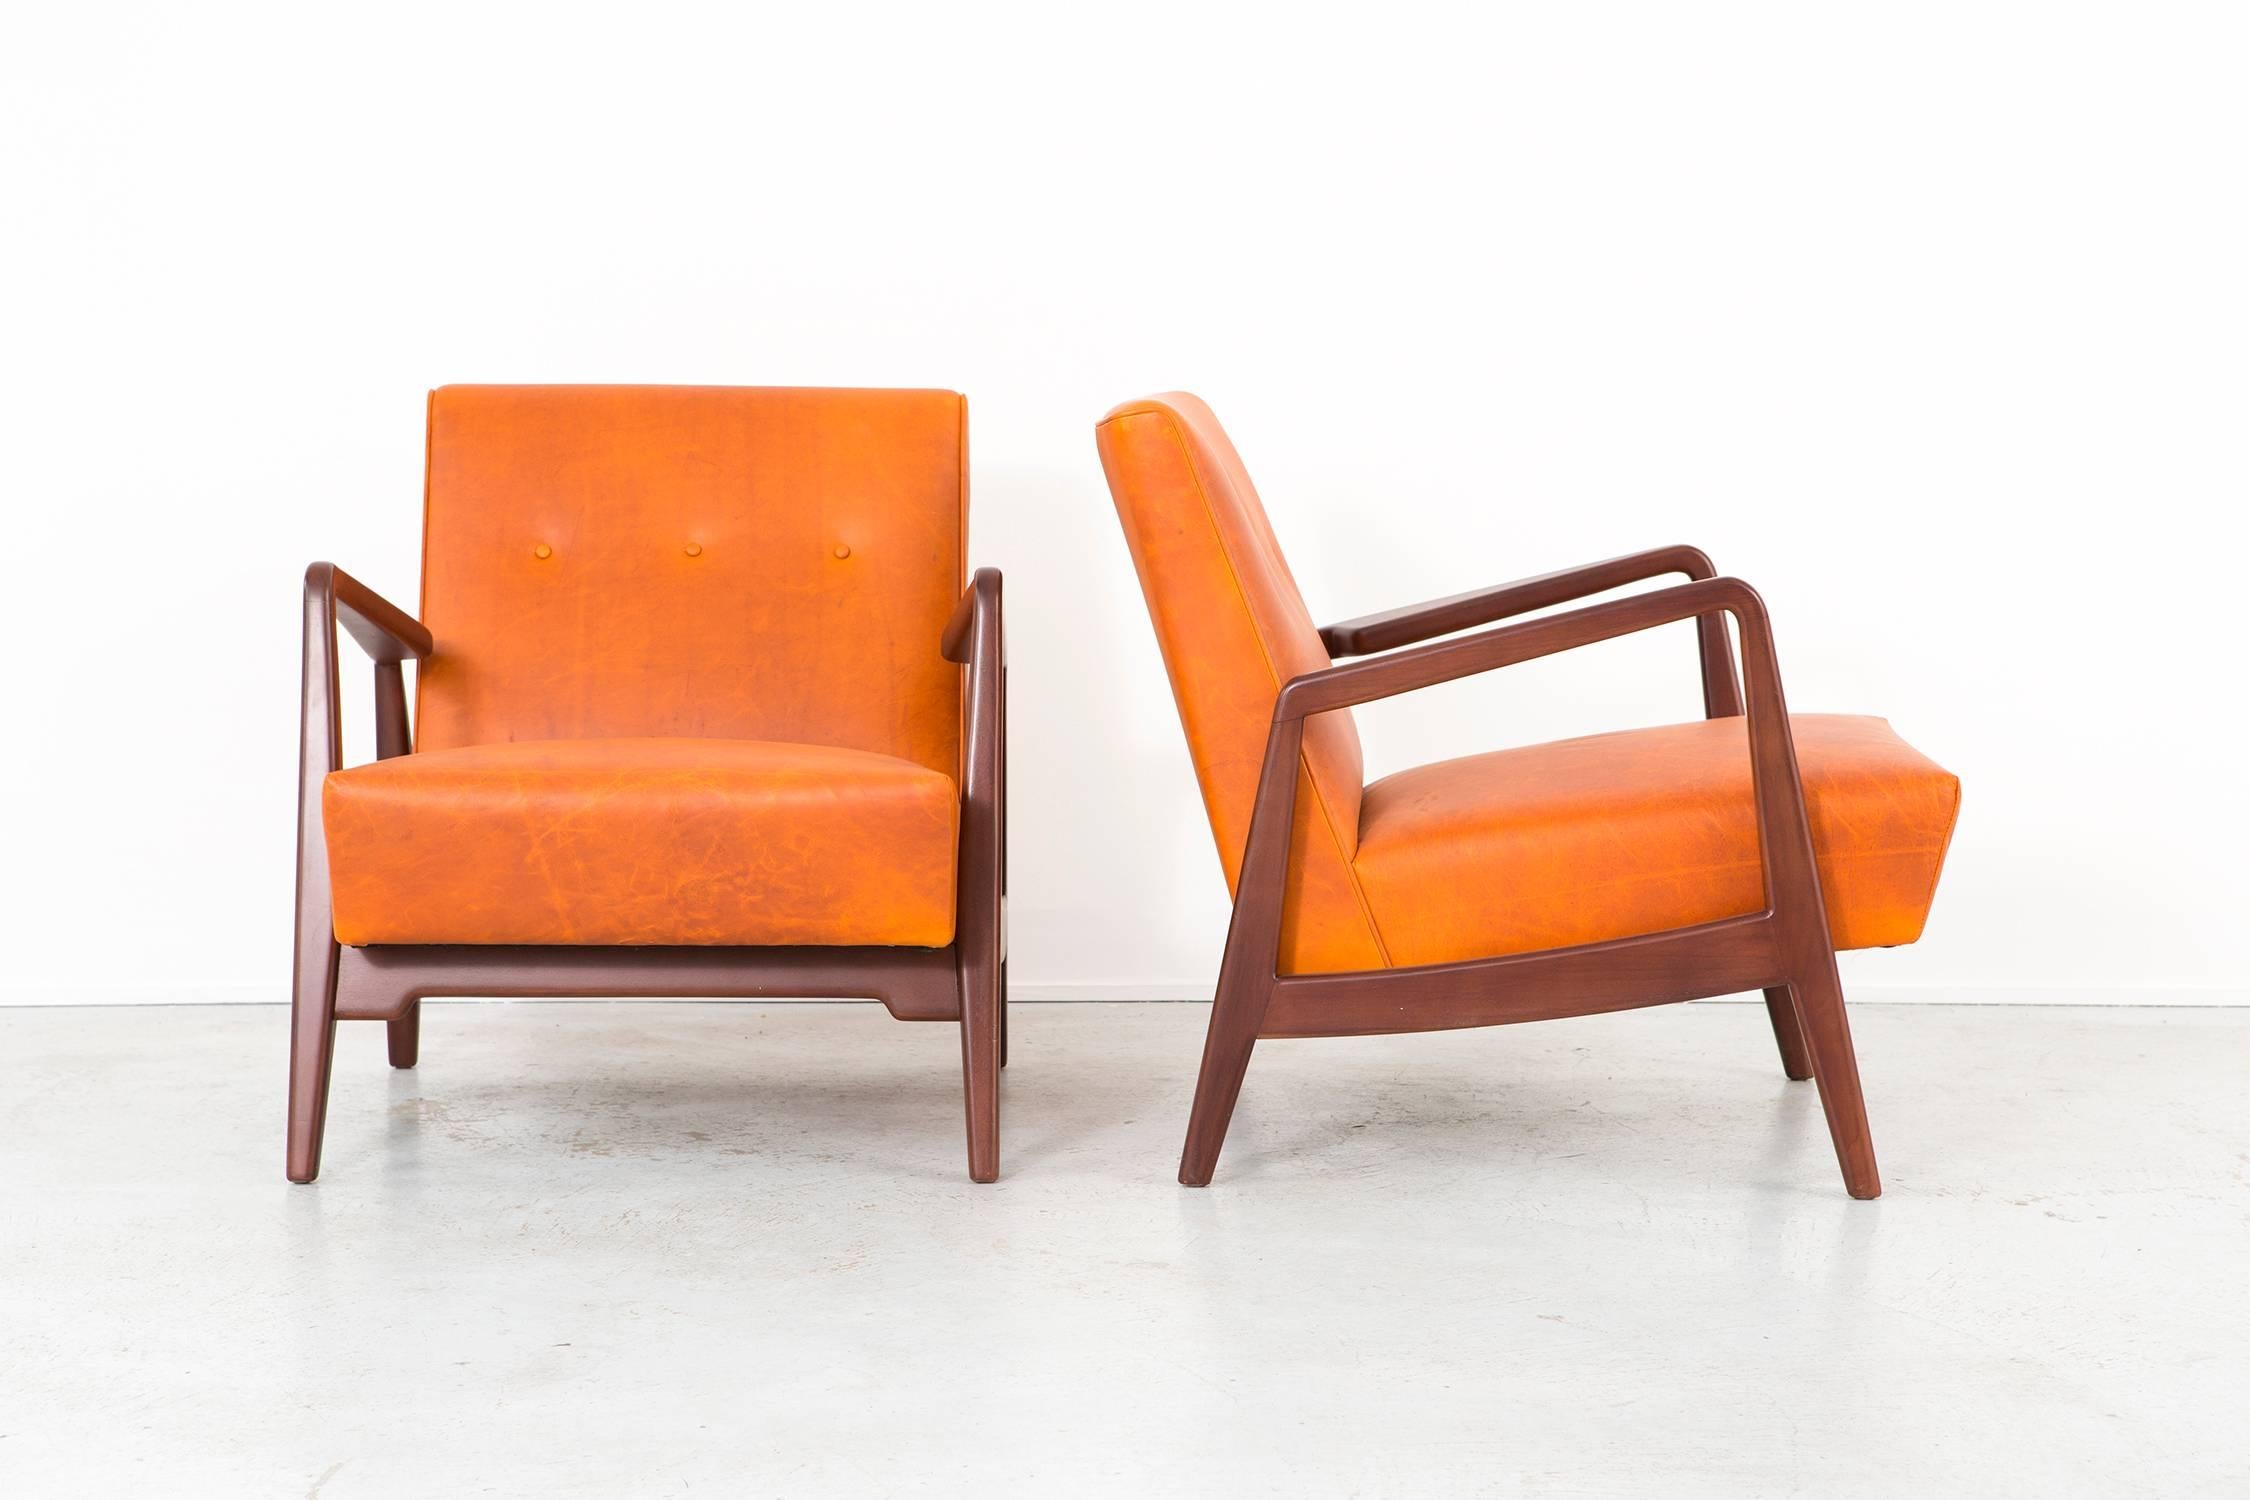 Set of lounge chairs

Designed by Jens Risom for Jens Risom design

USA, circa 1950s

Reupholstered in shoe leather. This natural leather has wonderful patina showing imperfections in the hide such as scars and other range marks giving it a well